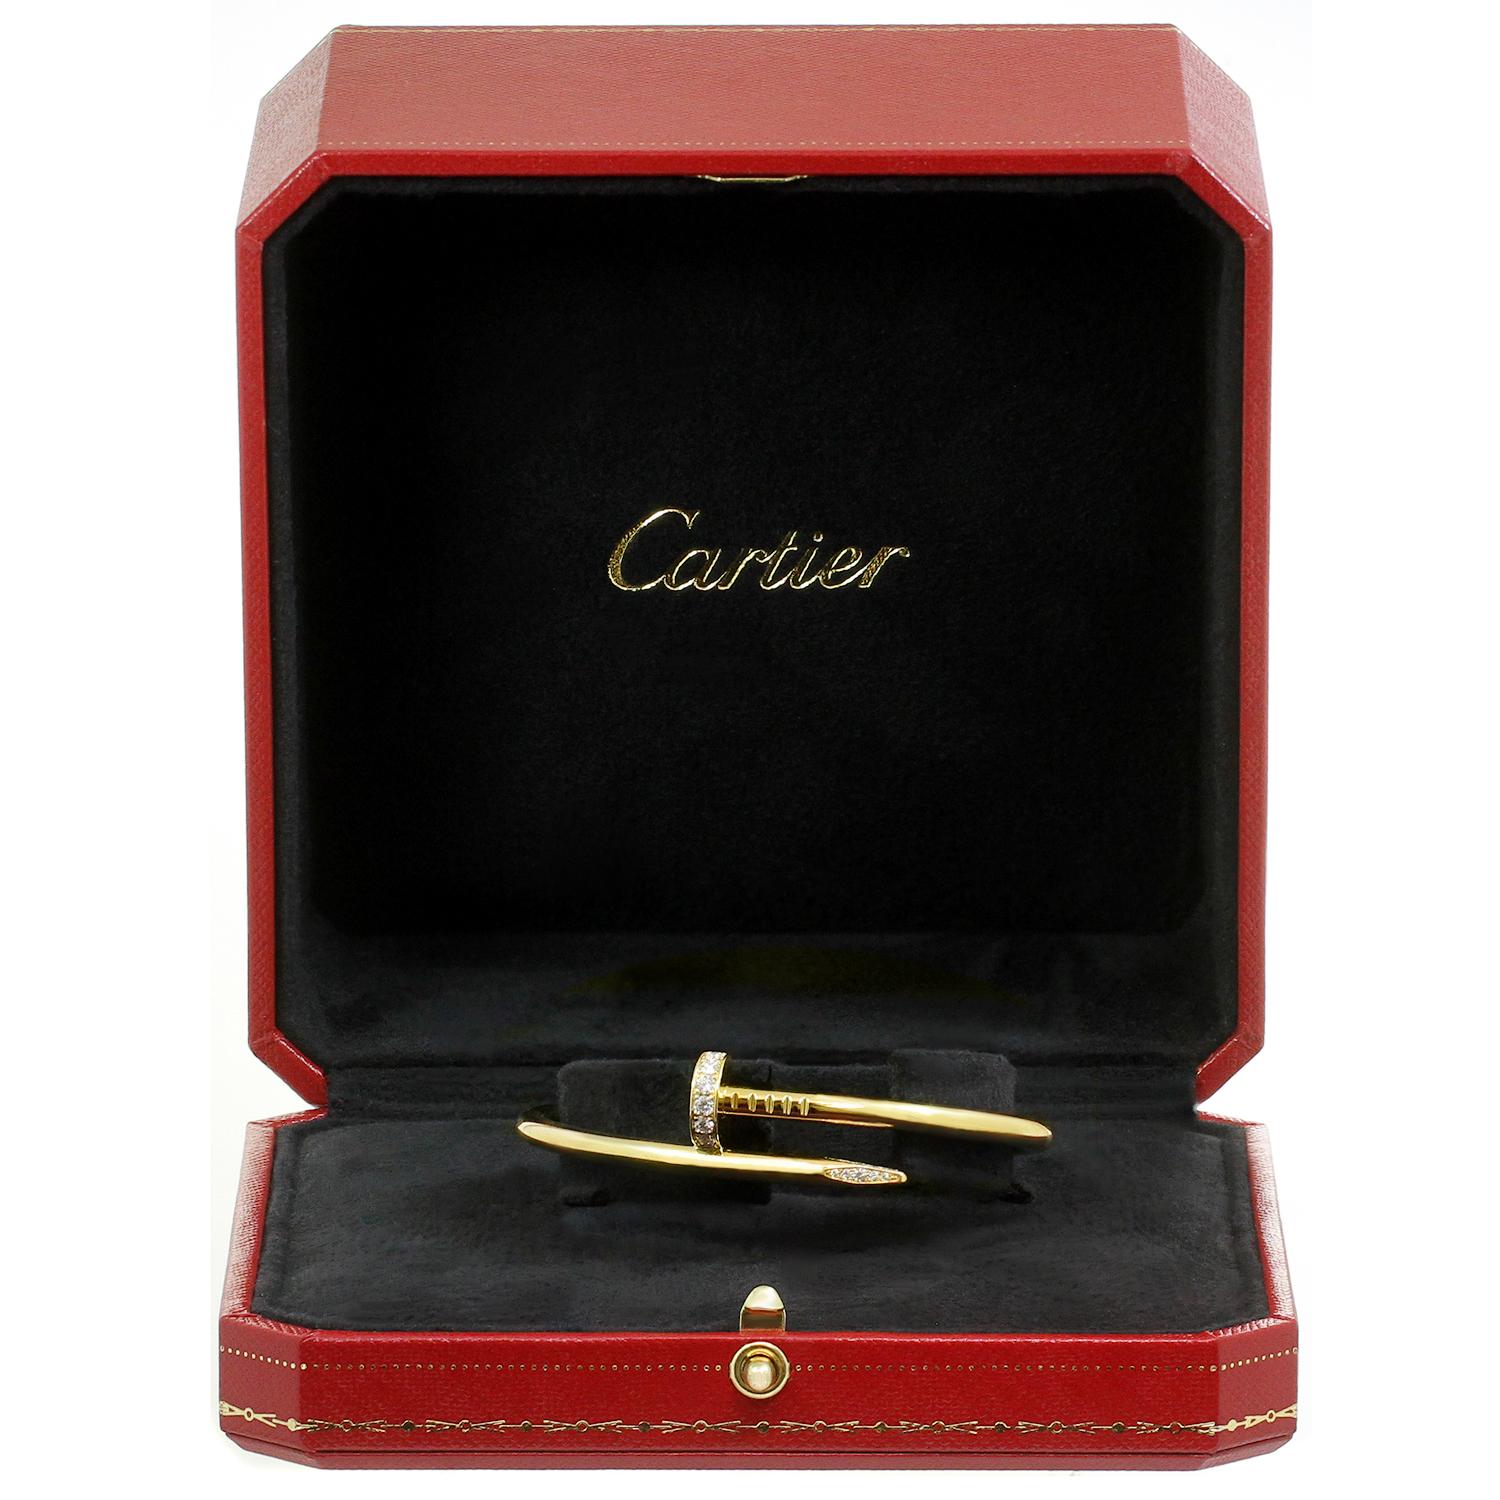 This elegant hinged bracelet from Cartier's iconic Juste Un Clou collection is crafted in 18k yellow gold and set with brilliant-cut round D-F VVS1-VVS2 diamonds of an estiamted 0.59 carats. This is the new model of the bangle in size 16. Made in